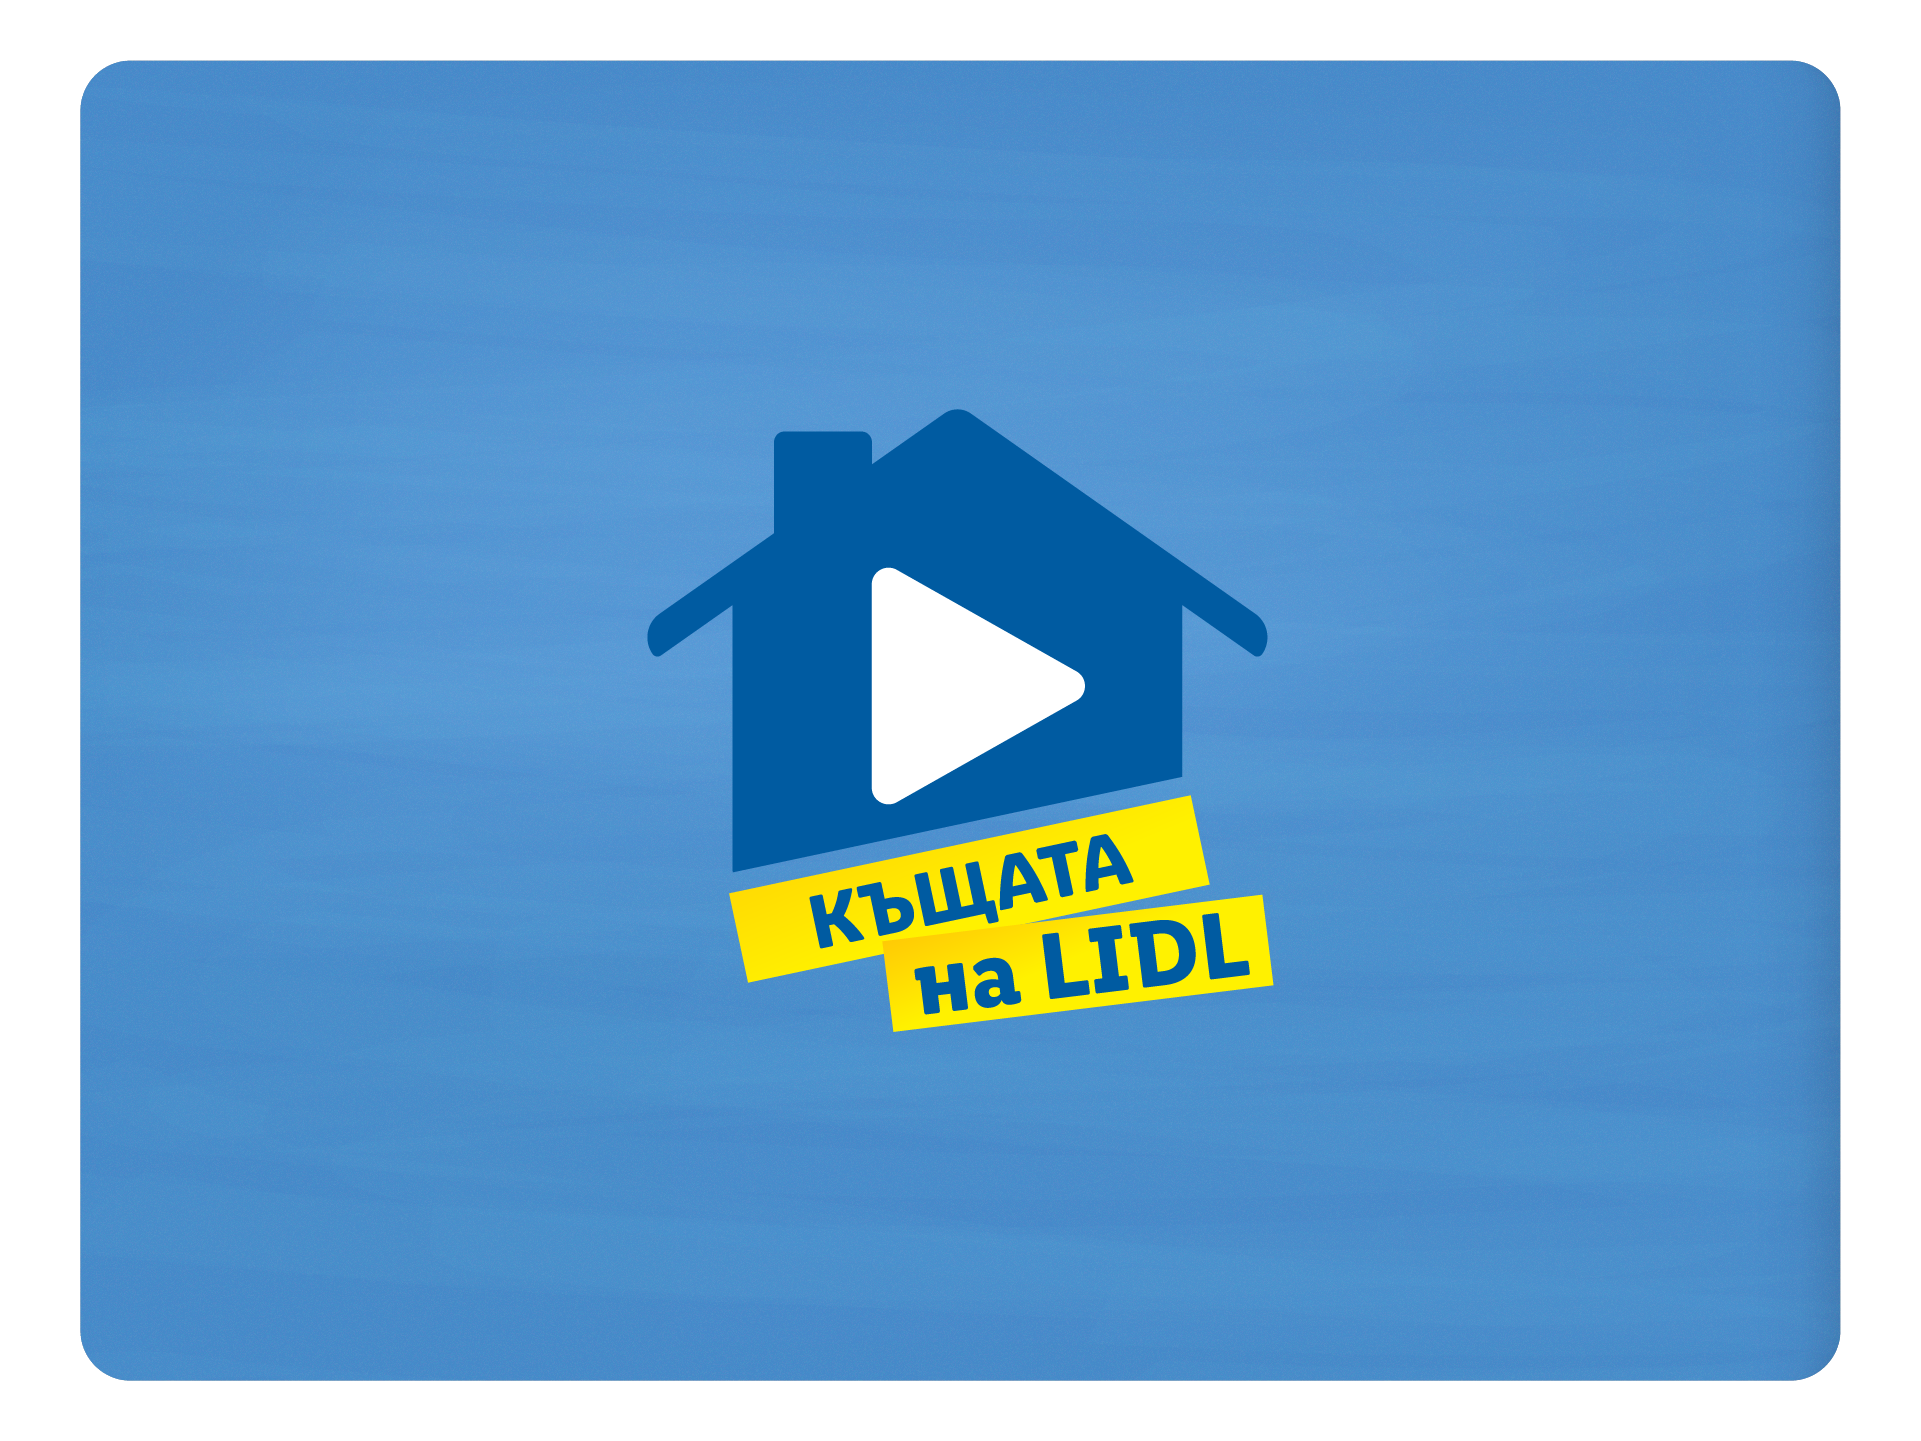 House of Lidl